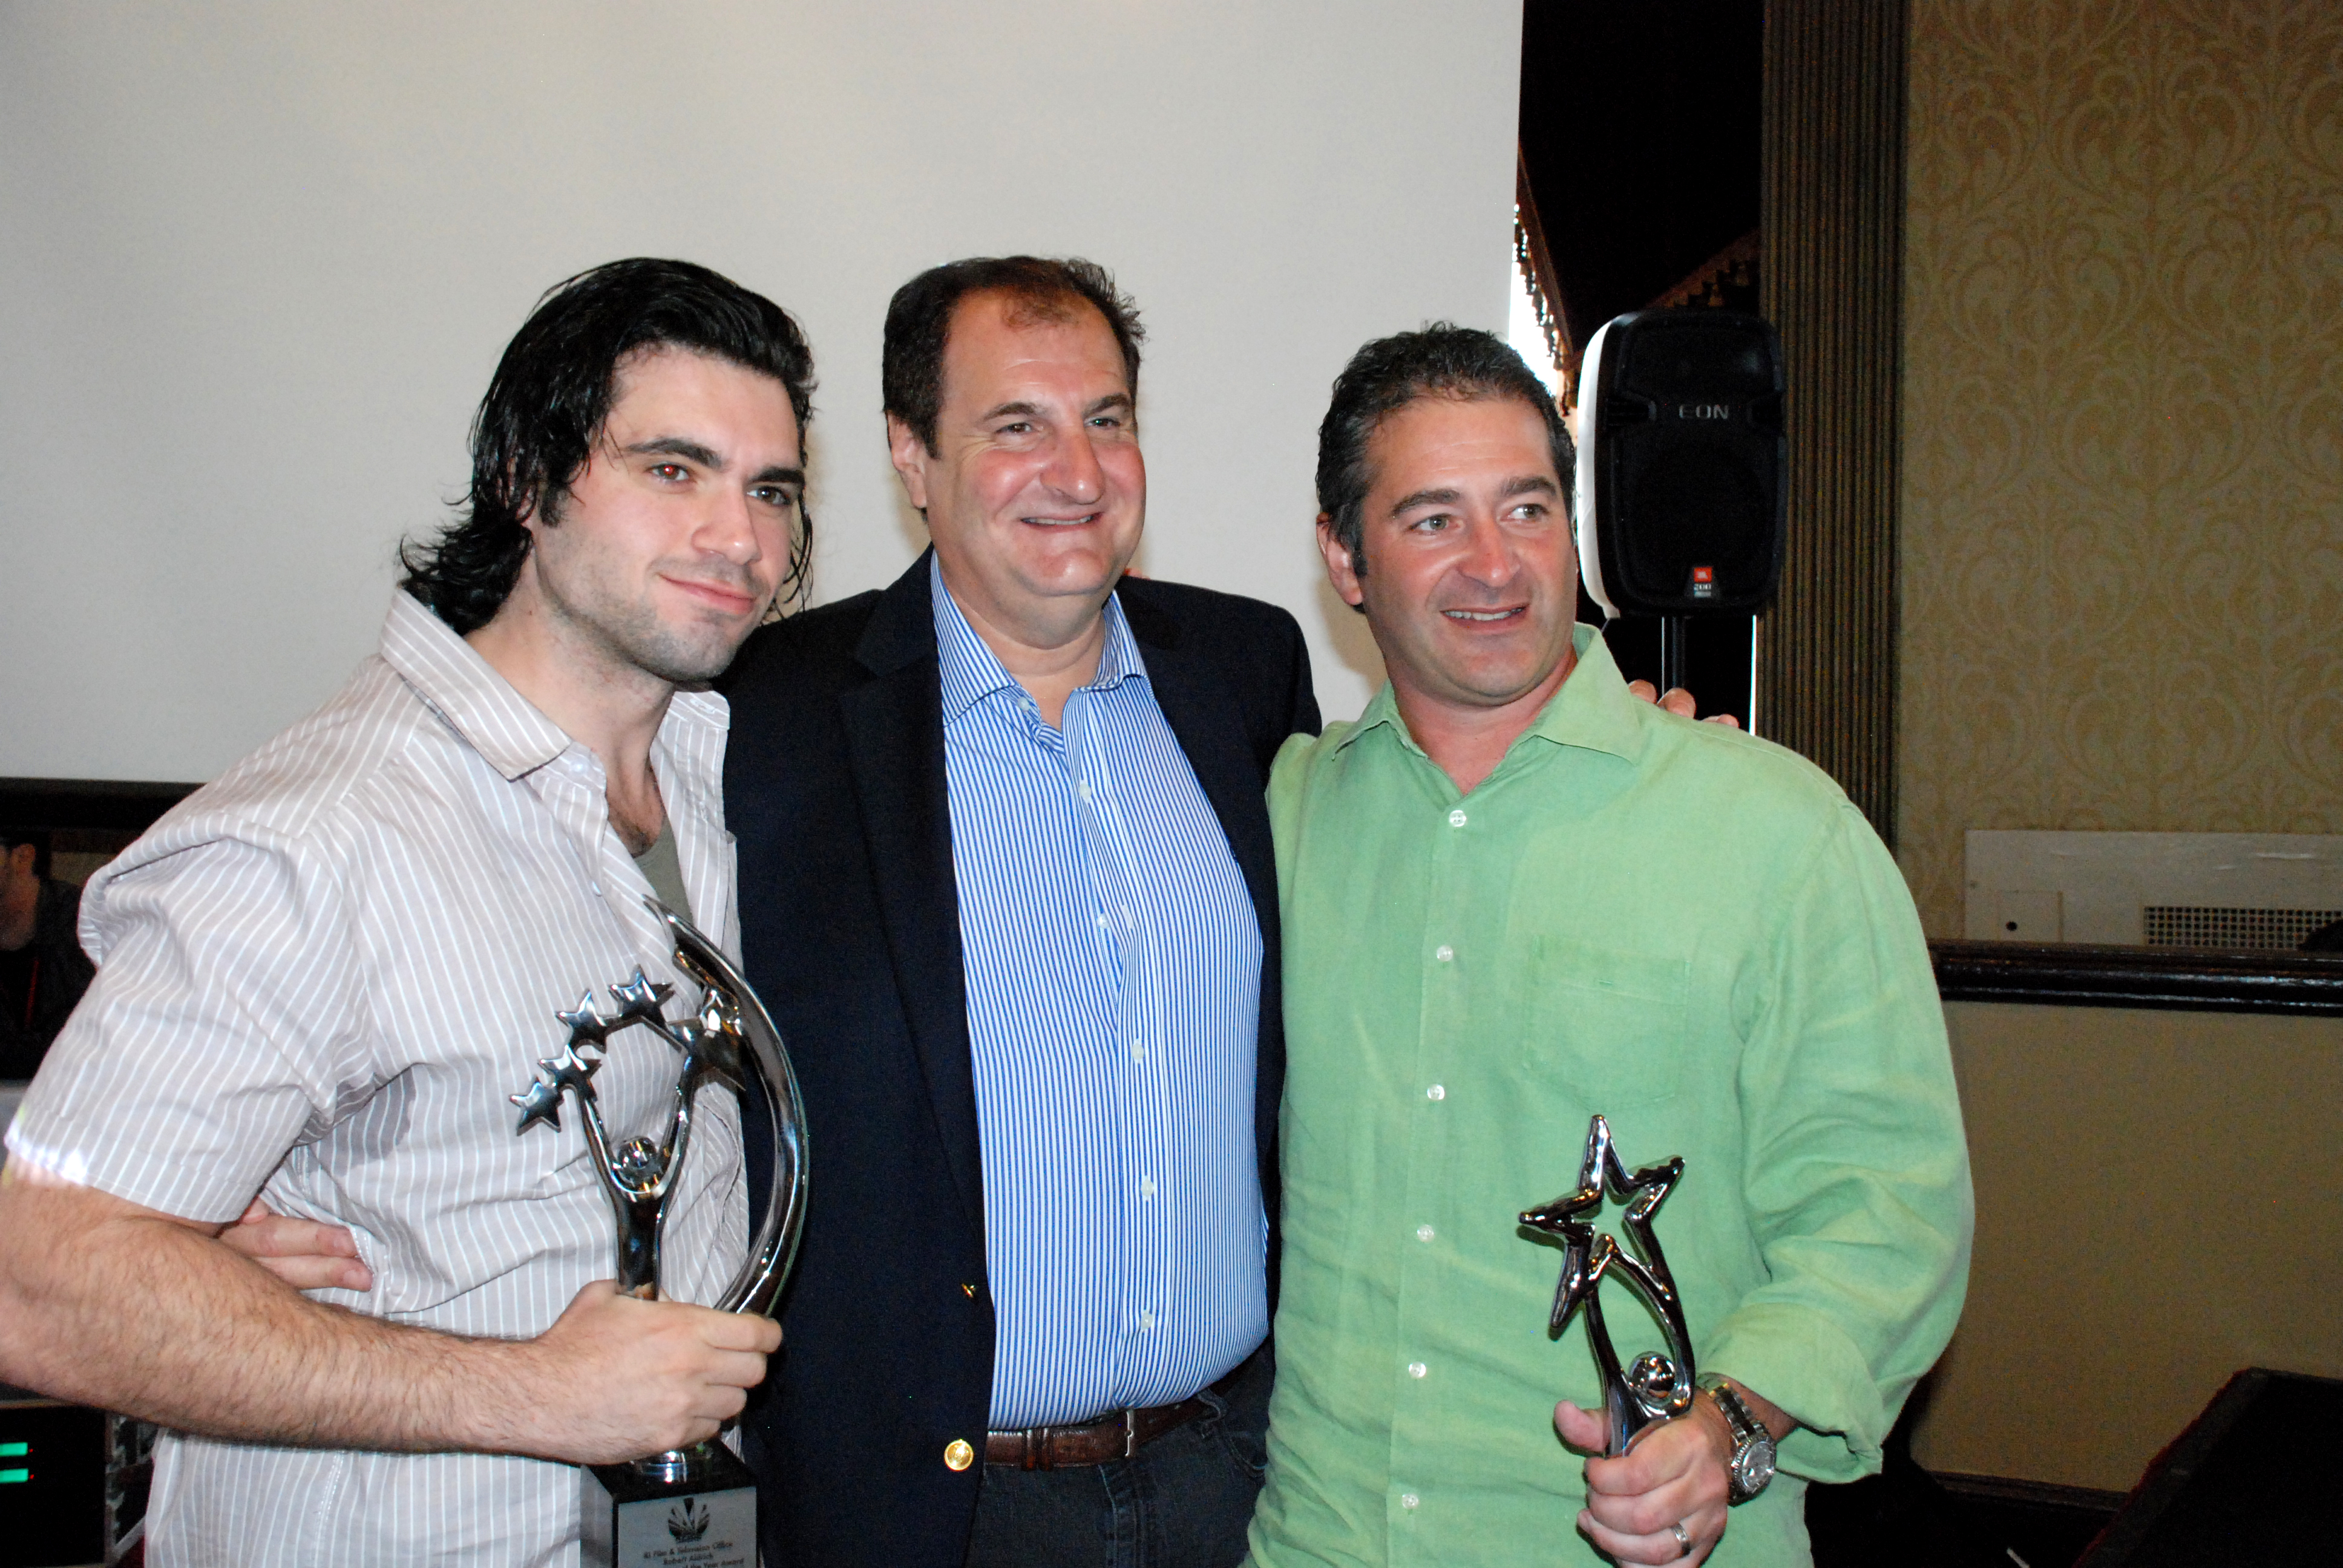 Steven Feinberg presents awards to Tommy DeNucci and Chad Verdi